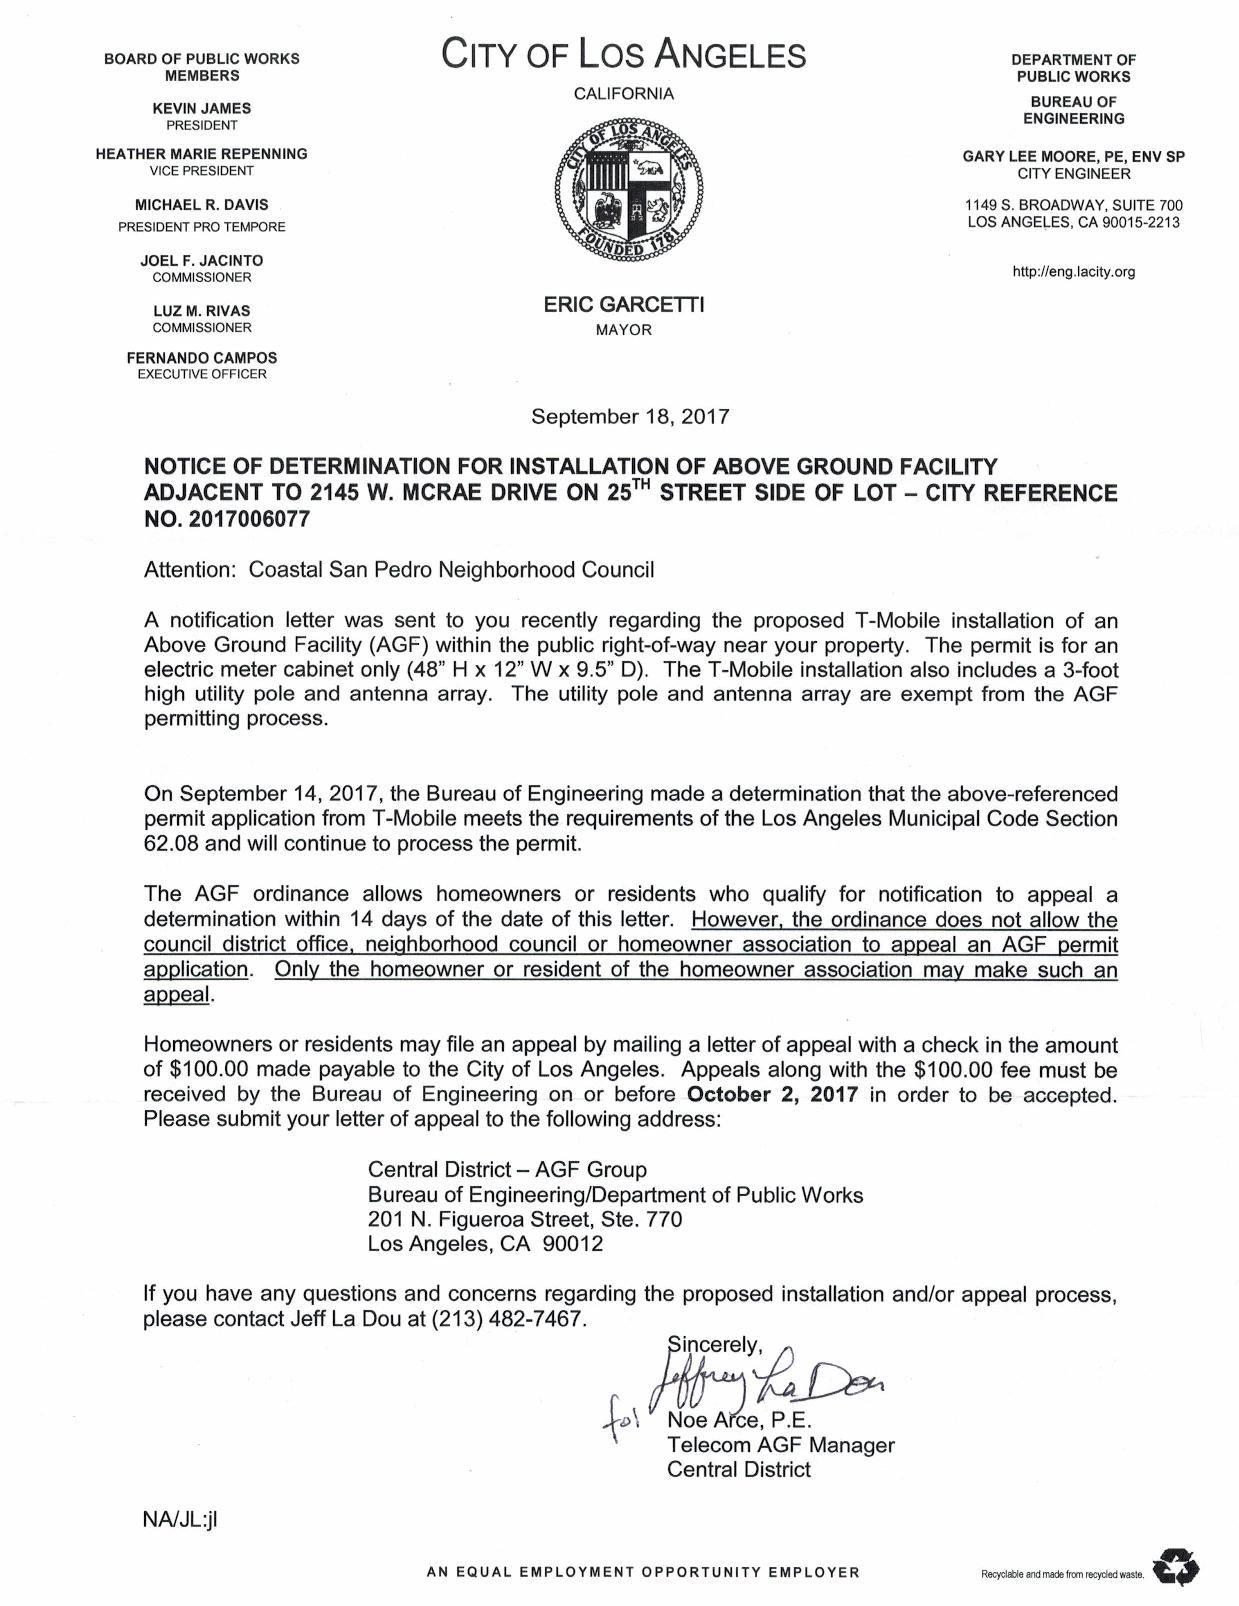 Los Angeles Bureau of Engineering Logo - Notice of Determination for Installation of T-mobile above ground ...